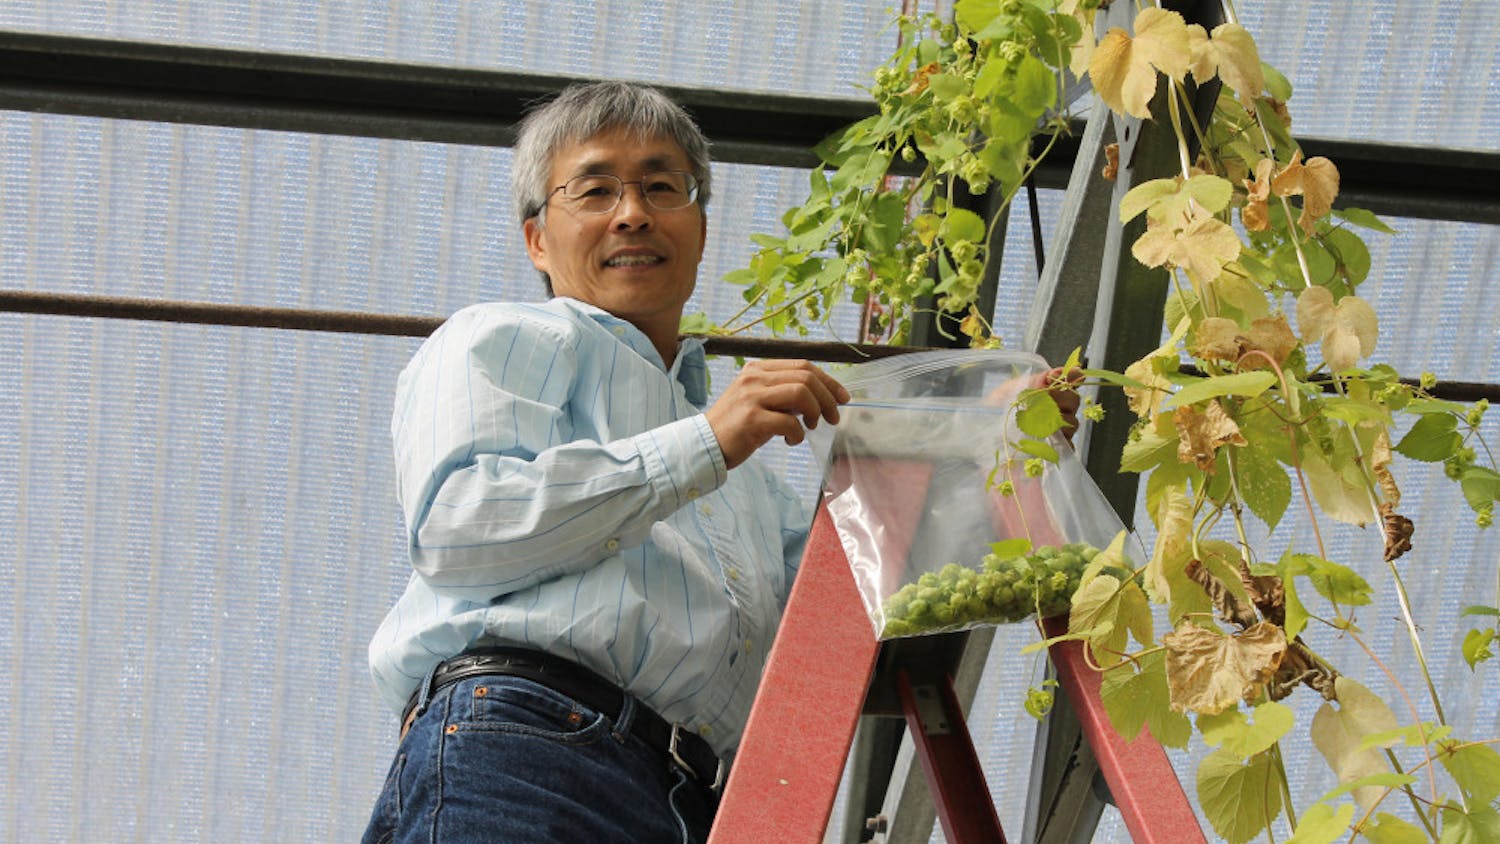 Zhanao Deng is one of the University of Florida scientists working on limiting the nematode problem in the state. Currently, Cascade hops have been the most successful.